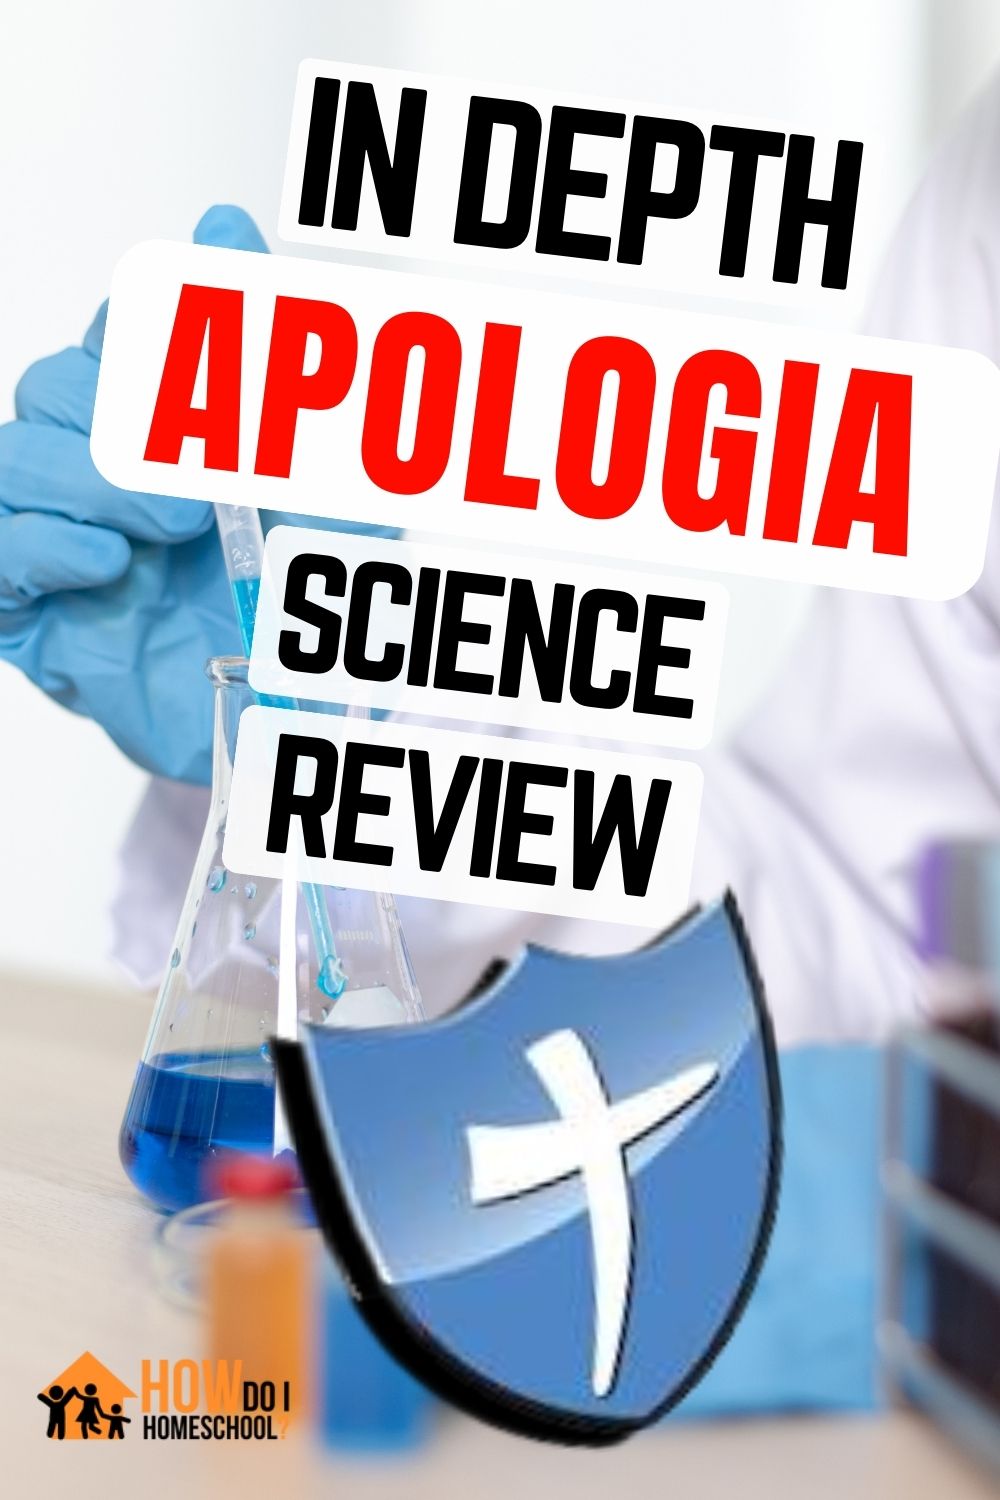 Find out how the Apologia Science Curriculum compares to other popular homeschool science programs.